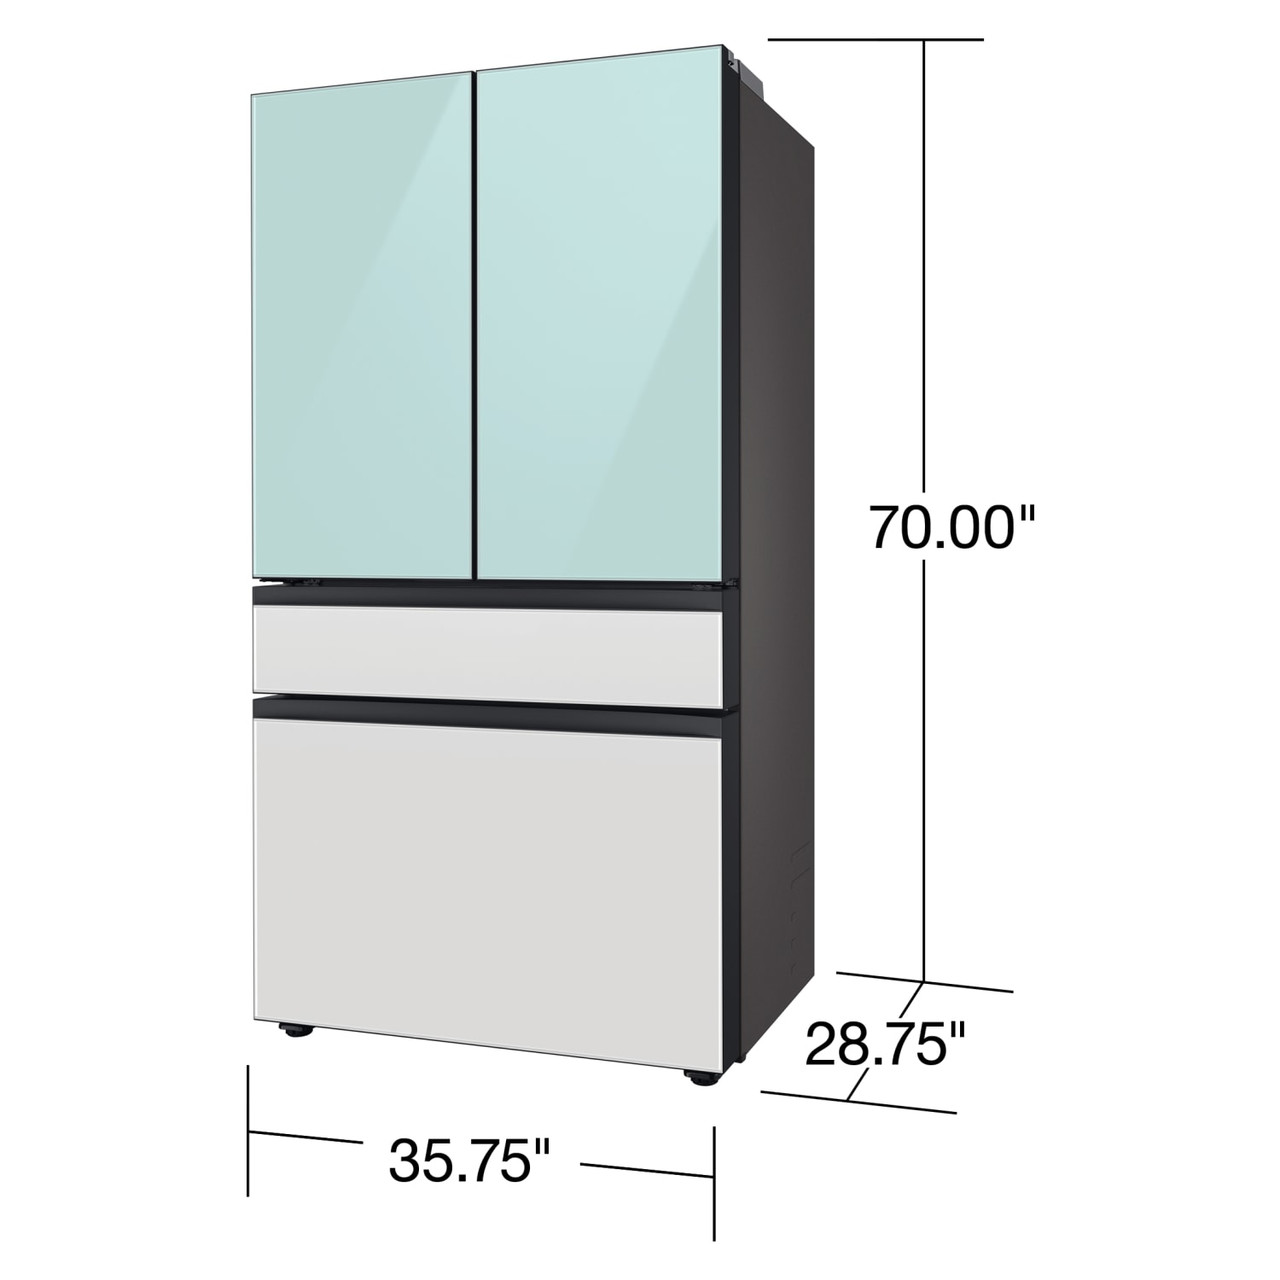 Samsung BESPOKE 23 cu. ft. Smart 4-Door French-Door Refrigerator  in Morning Blue Glass Top Panel with White Glass Middle and Bottom Panels